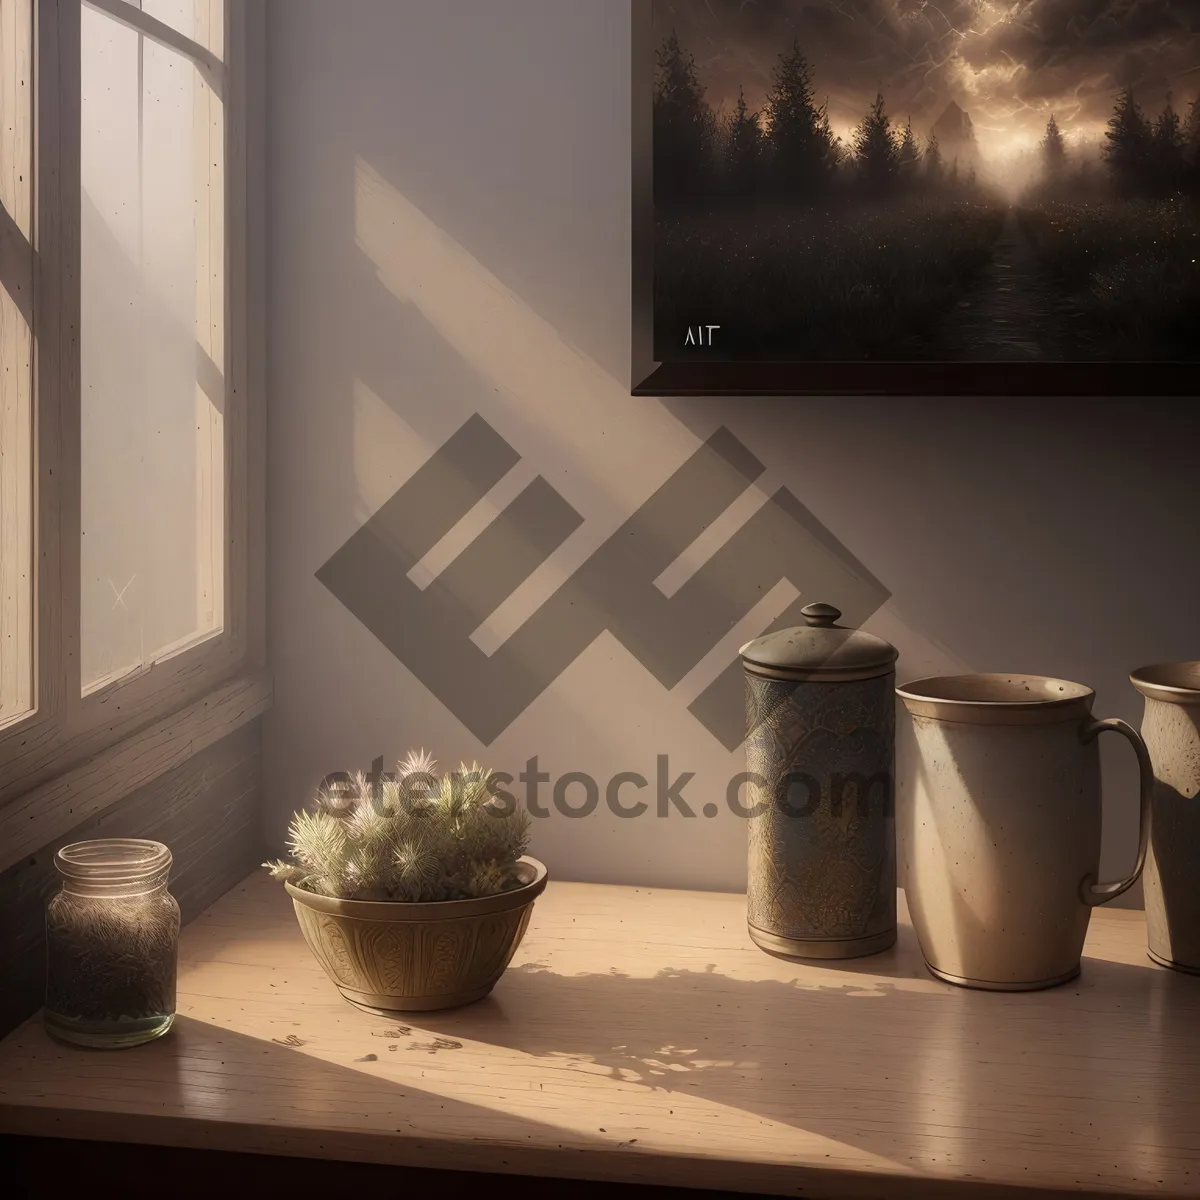 Picture of Tabletop Flower Vase on Windowsill